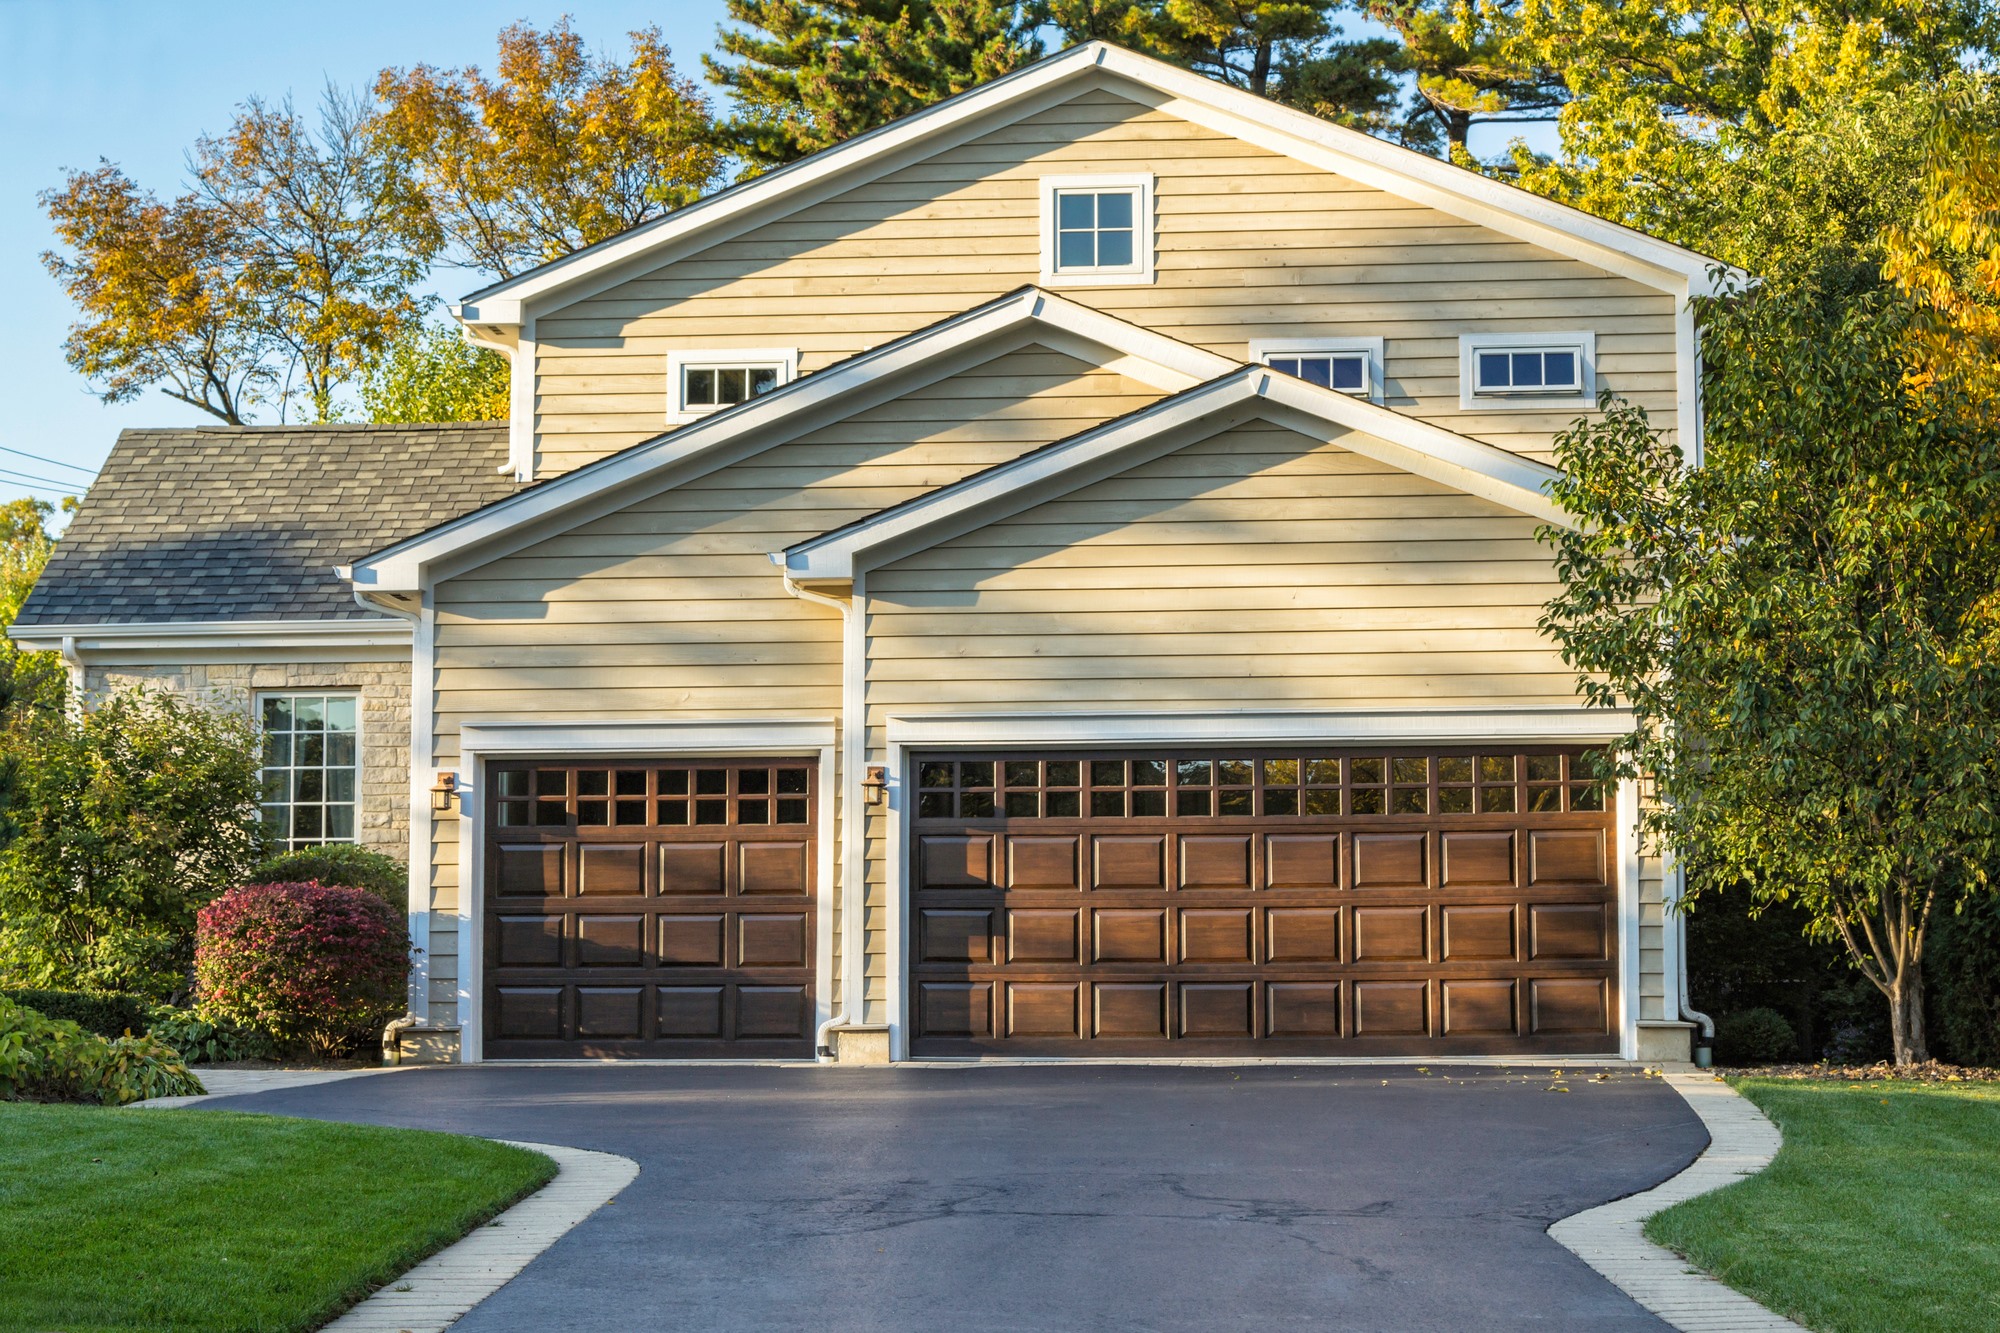 We are a professional garage door repair service serving the Salt Lake Valley. We offer affordable rates and same-day service.